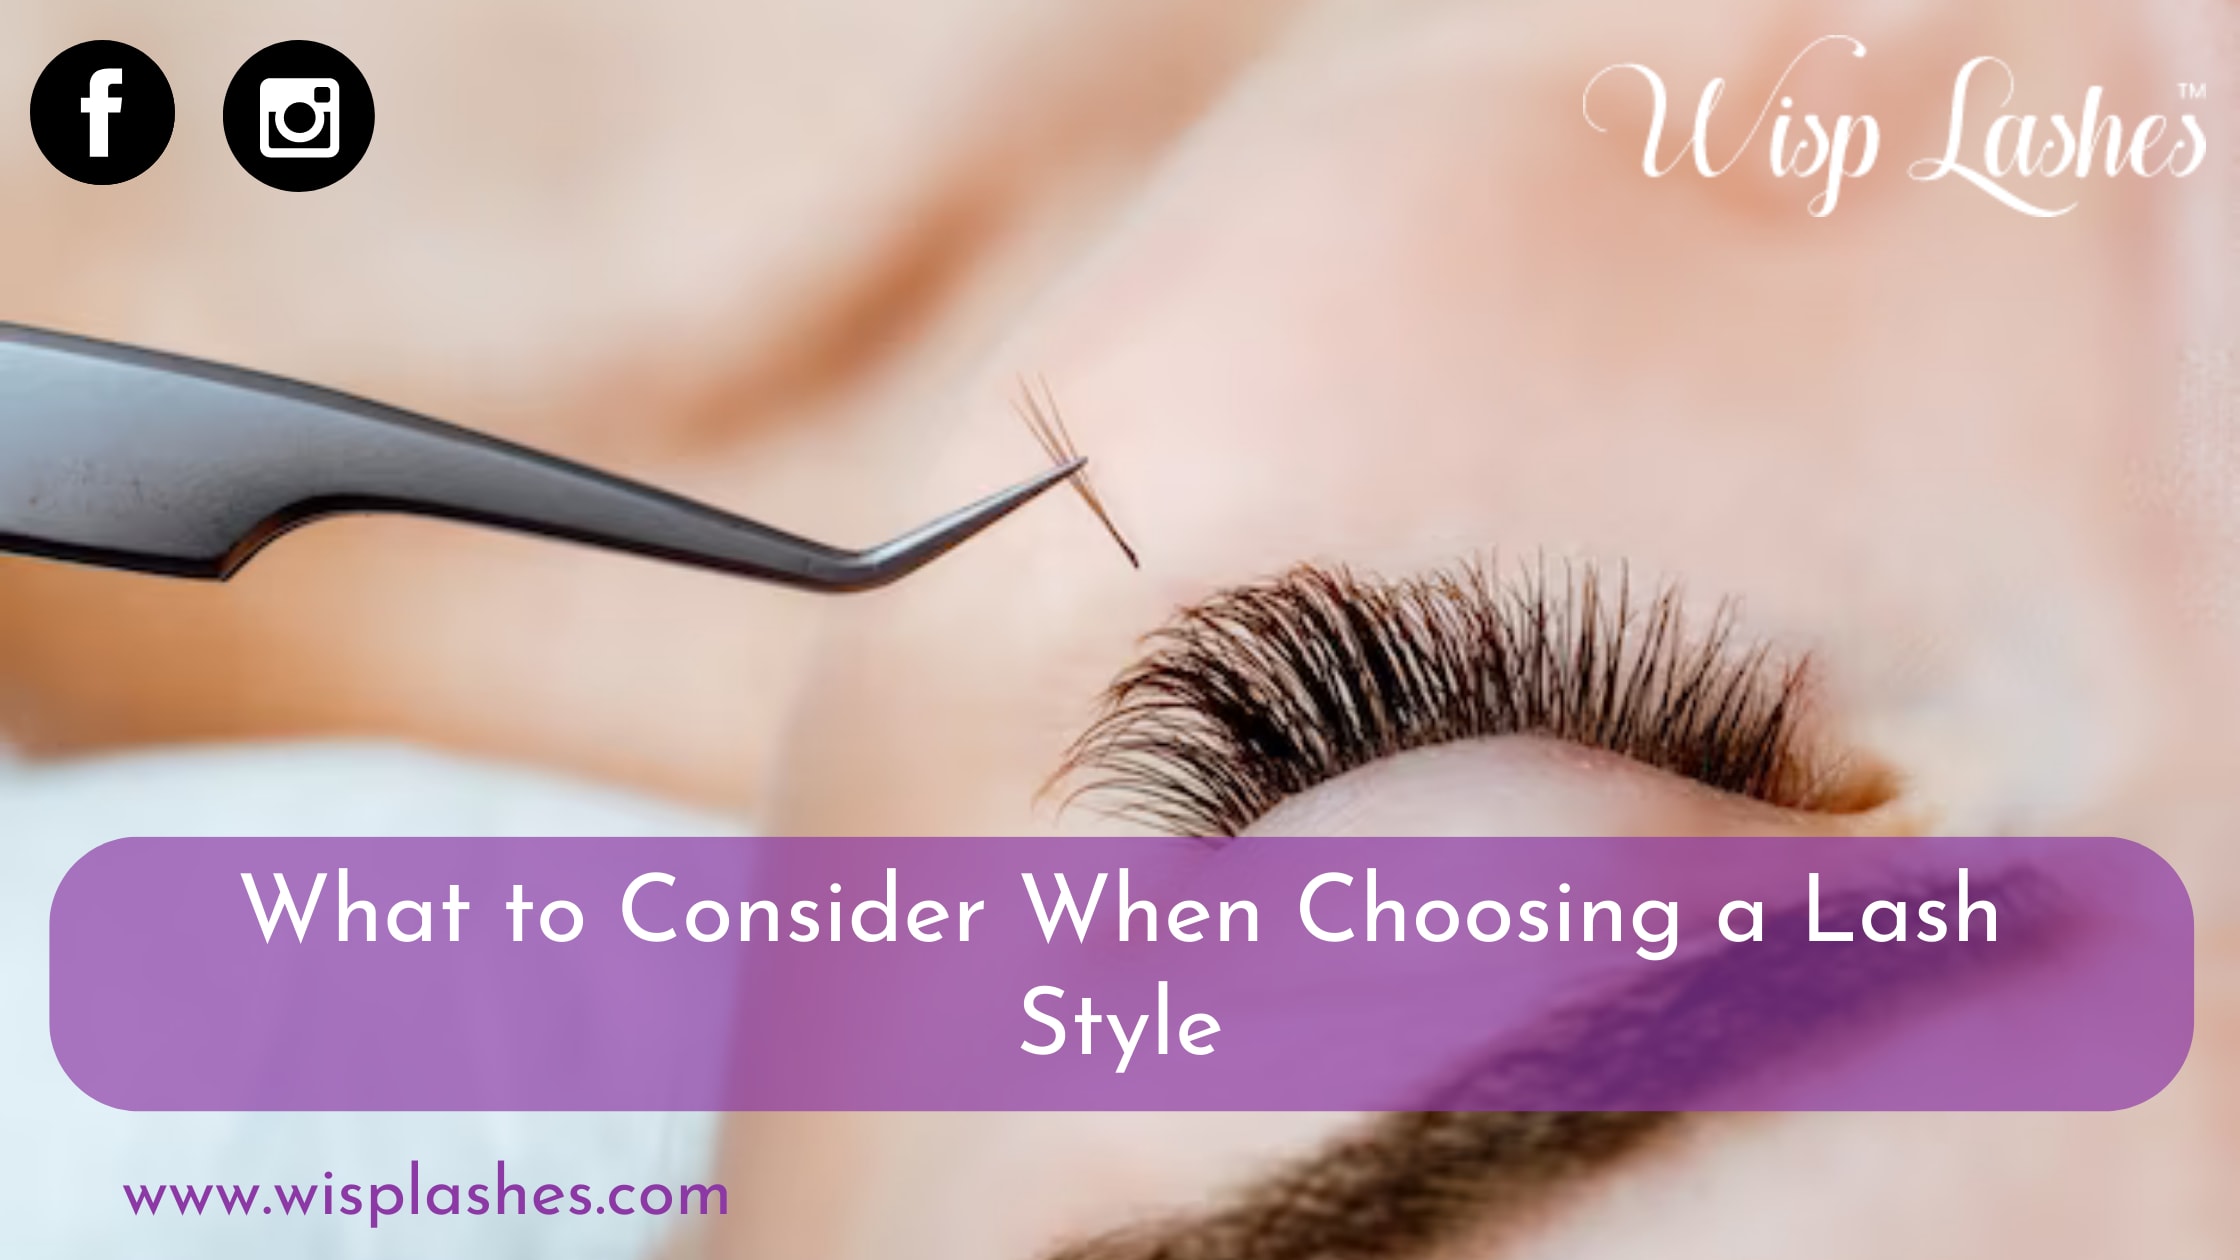 What to Consider When Choosing a Lash Style